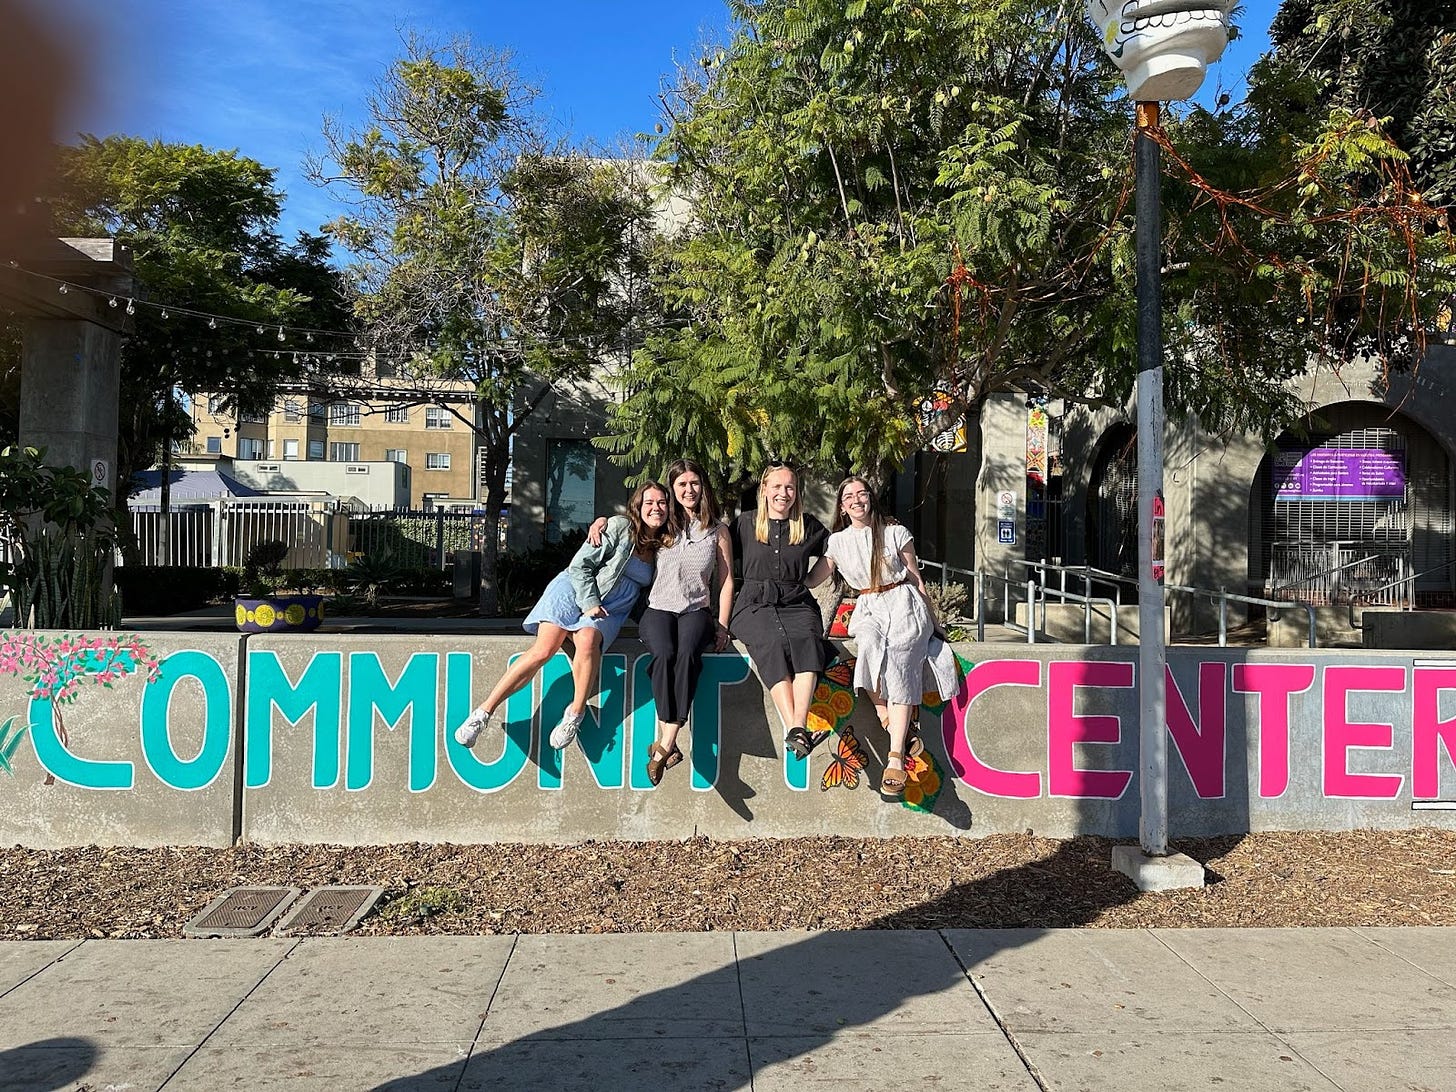 DFP's Climate Team posing in front of community center in San Diego.